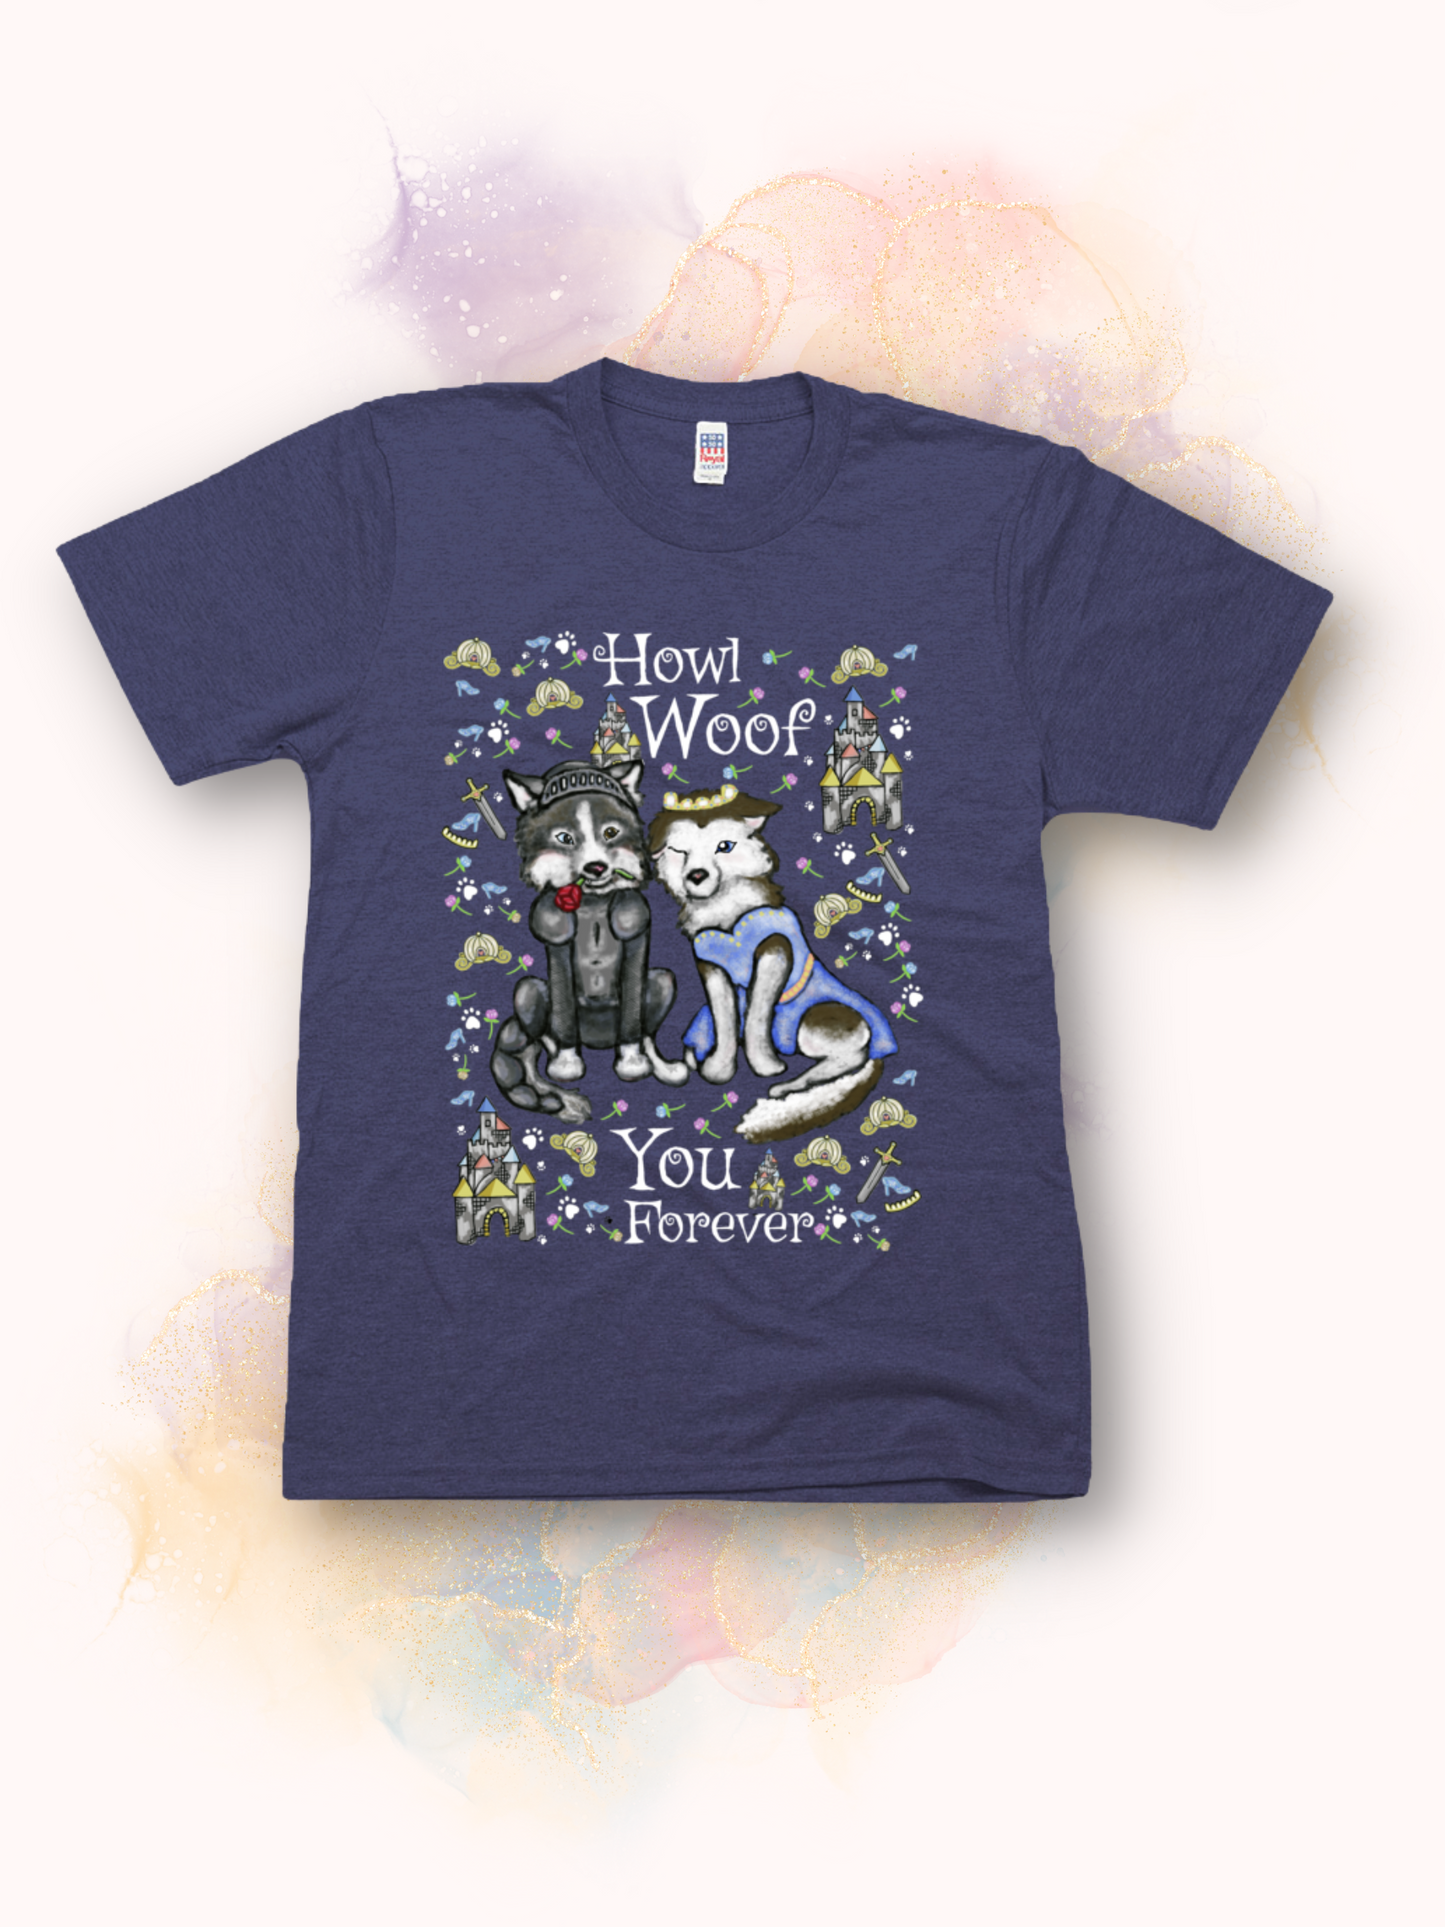 Howl Woof You - Unisex - Eco-Friendly USA Made Jersey Tee